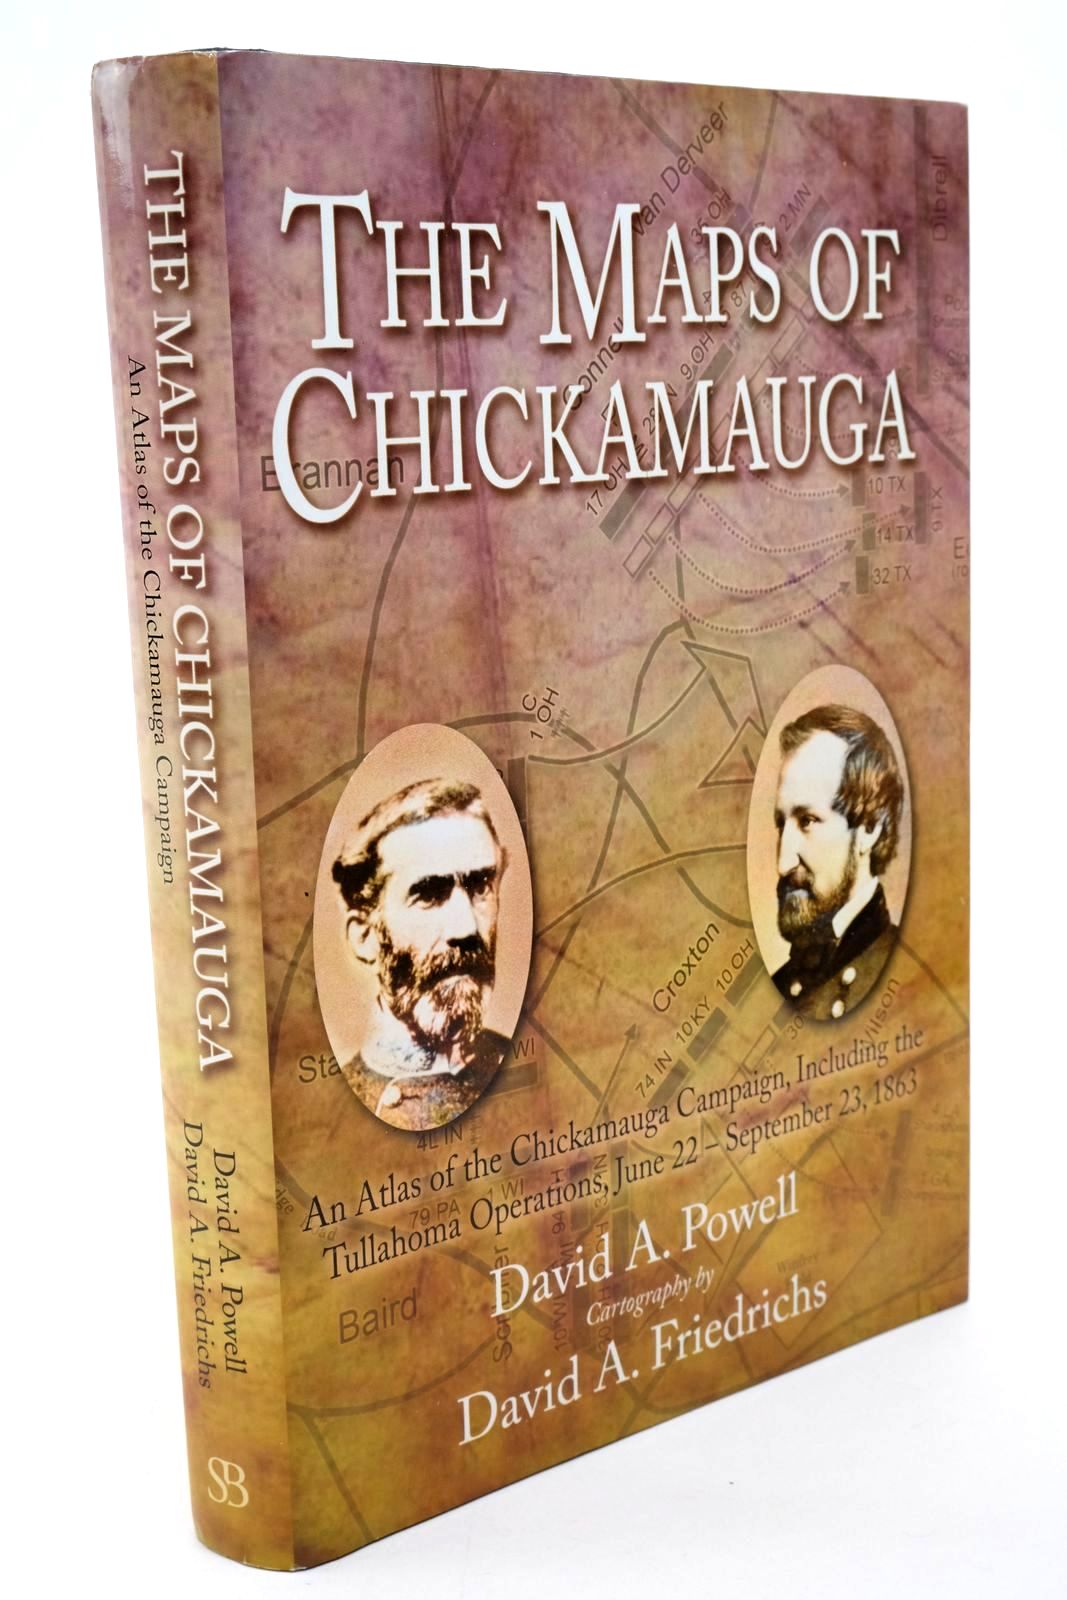 Photo of THE MAPS OF CHICKAMAUGA written by Powell, David A. illustrated by Friedrichs, David A. published by Savas Beatie (STOCK CODE: 1322537)  for sale by Stella & Rose's Books